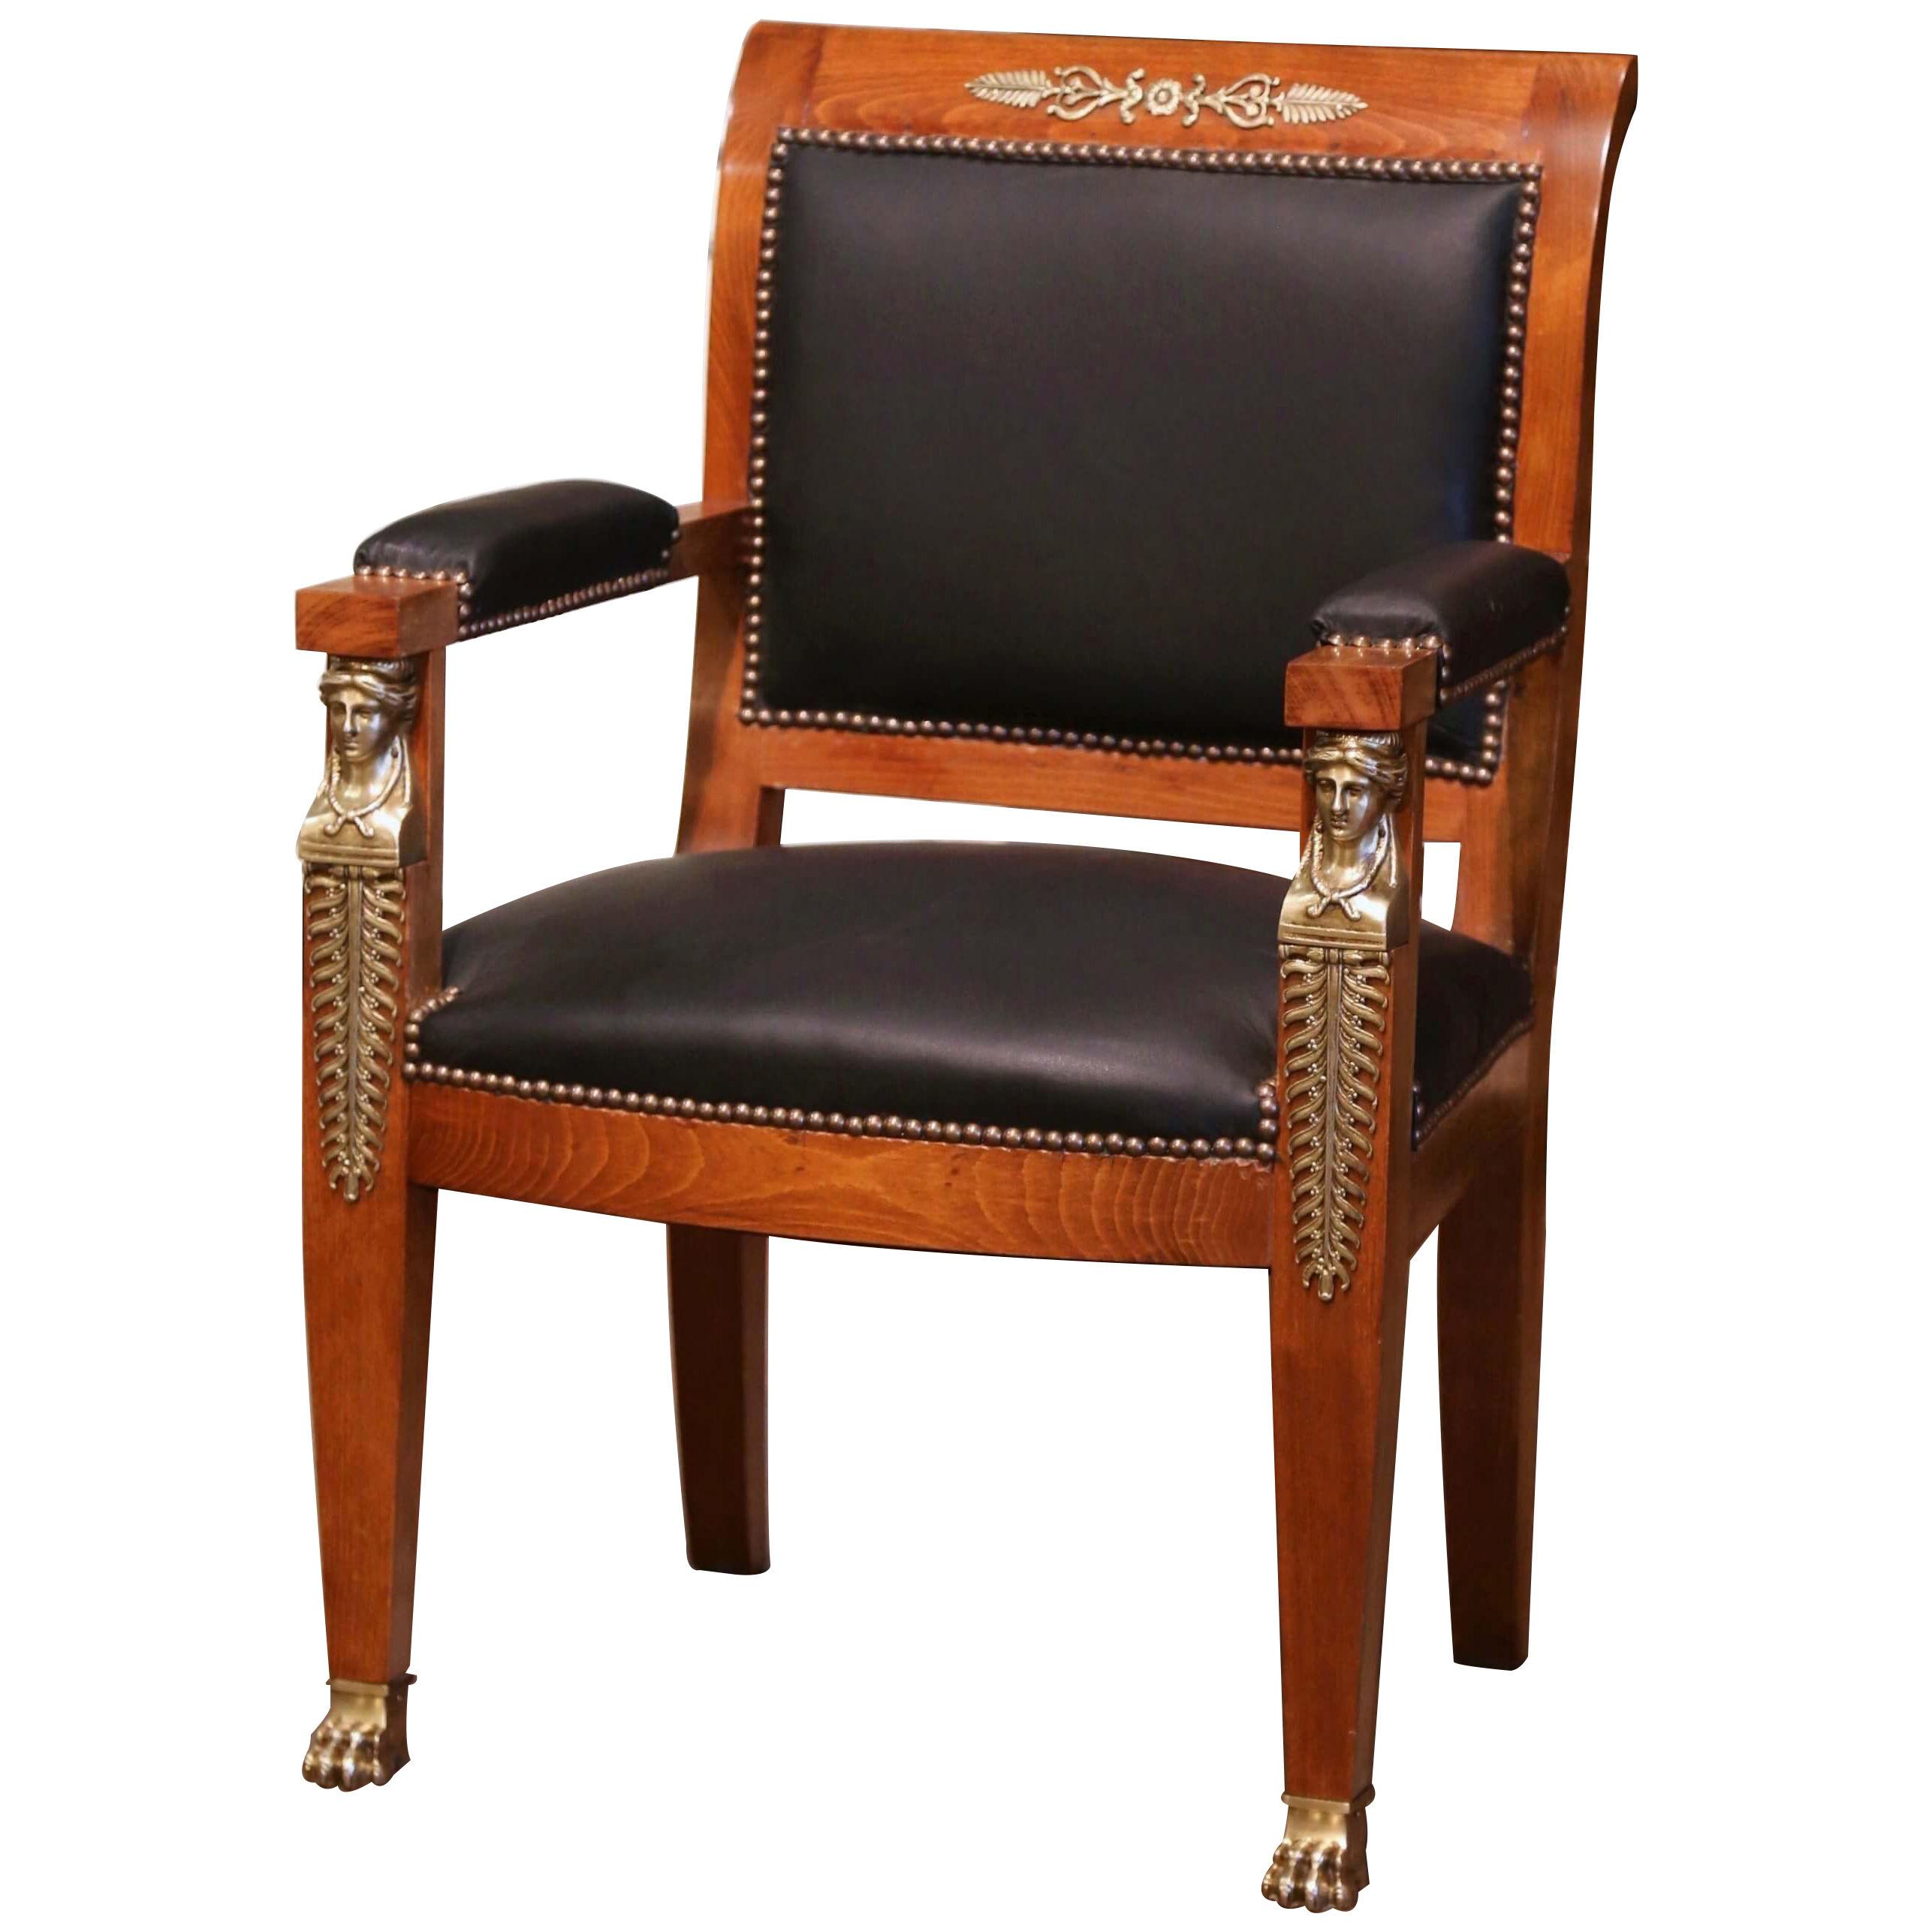 19th Century French Empire Mahogany and Leather Desk Armchair with Bronze Mounts